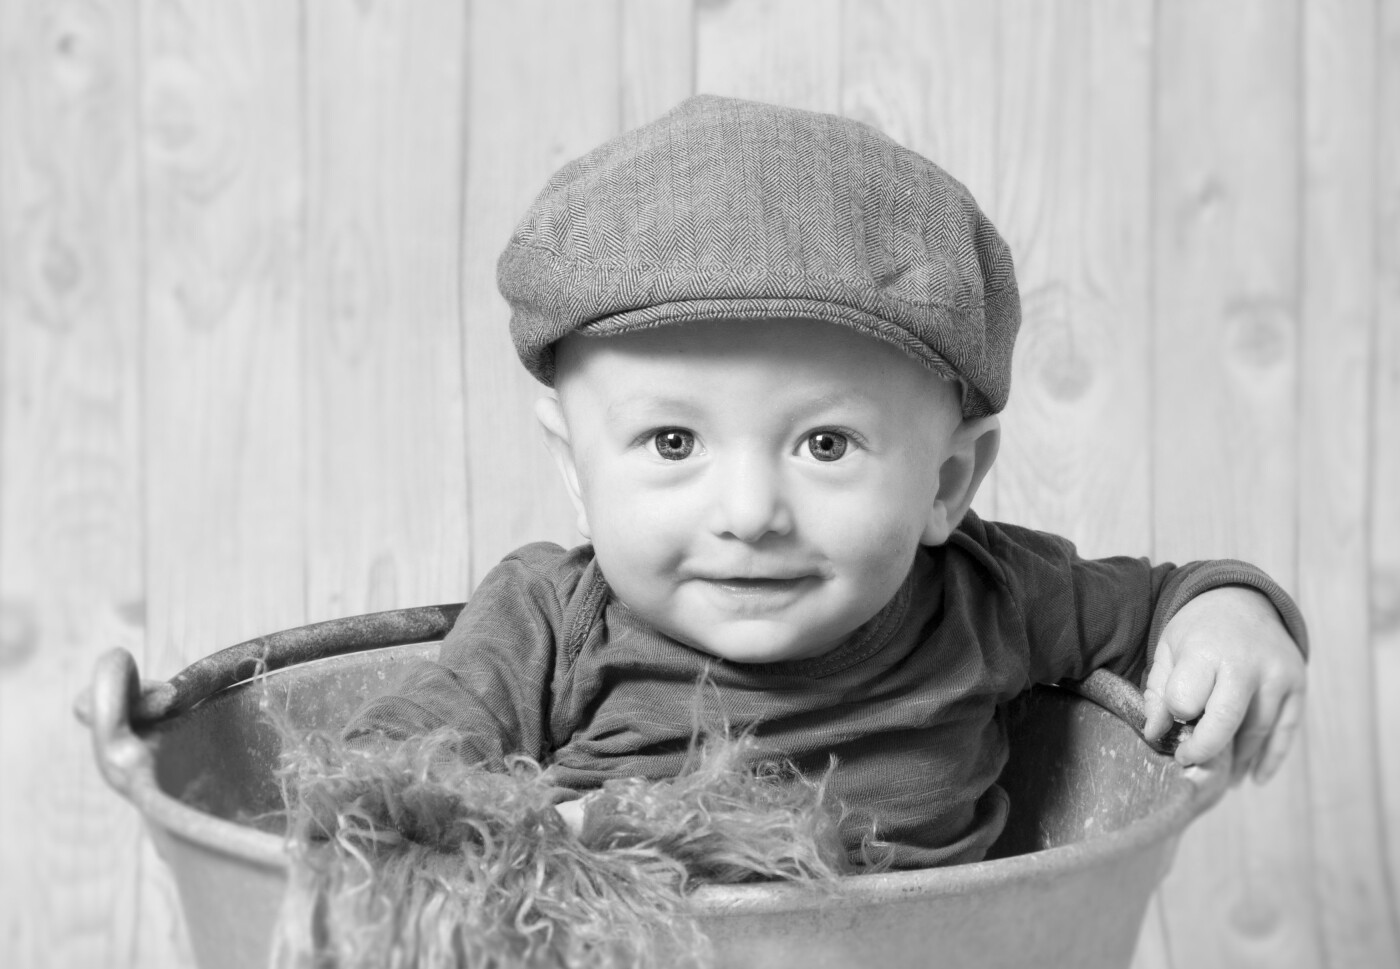 The image is of baby Tjalfe age 4 months. After struggling with kolik since birth this is one of the first pictures of him smiling. Tjalfe is sitting in a vintage milk bucket from the fifties.